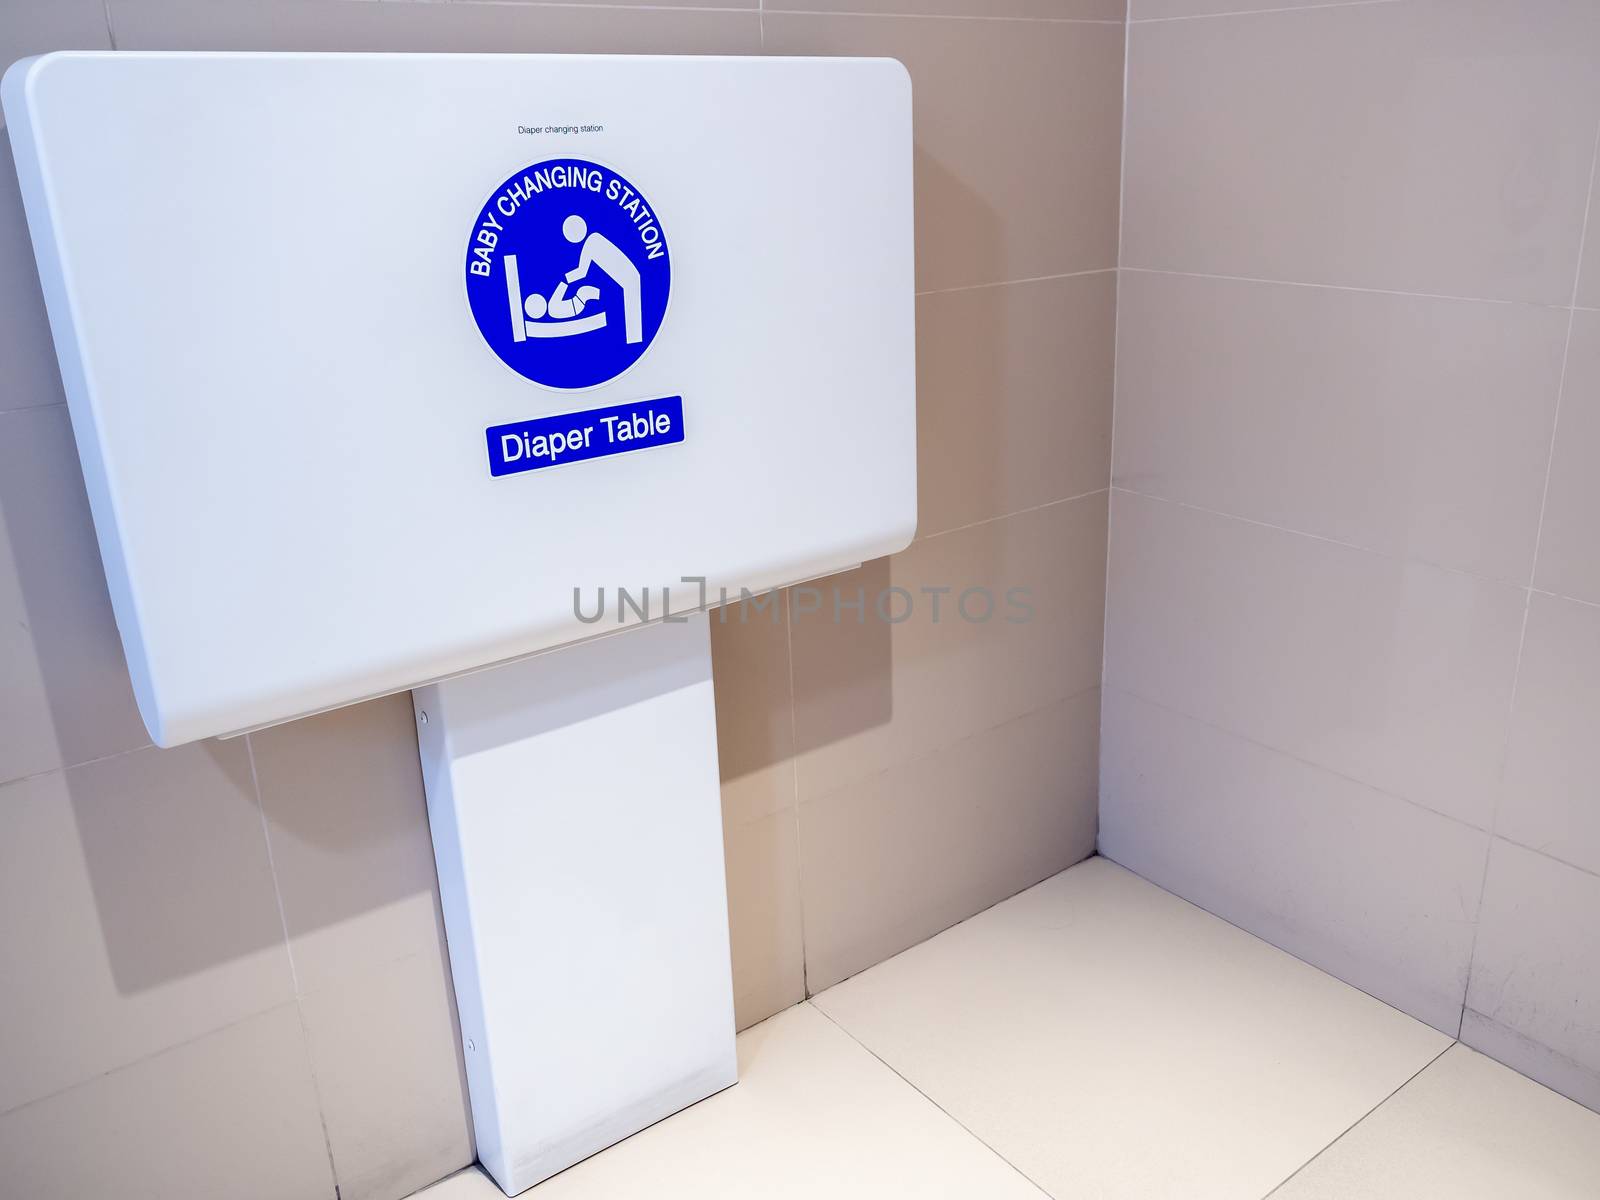 White diaper table changing station on the wall for baby changing diaper to facilitate to children parents in the airport.